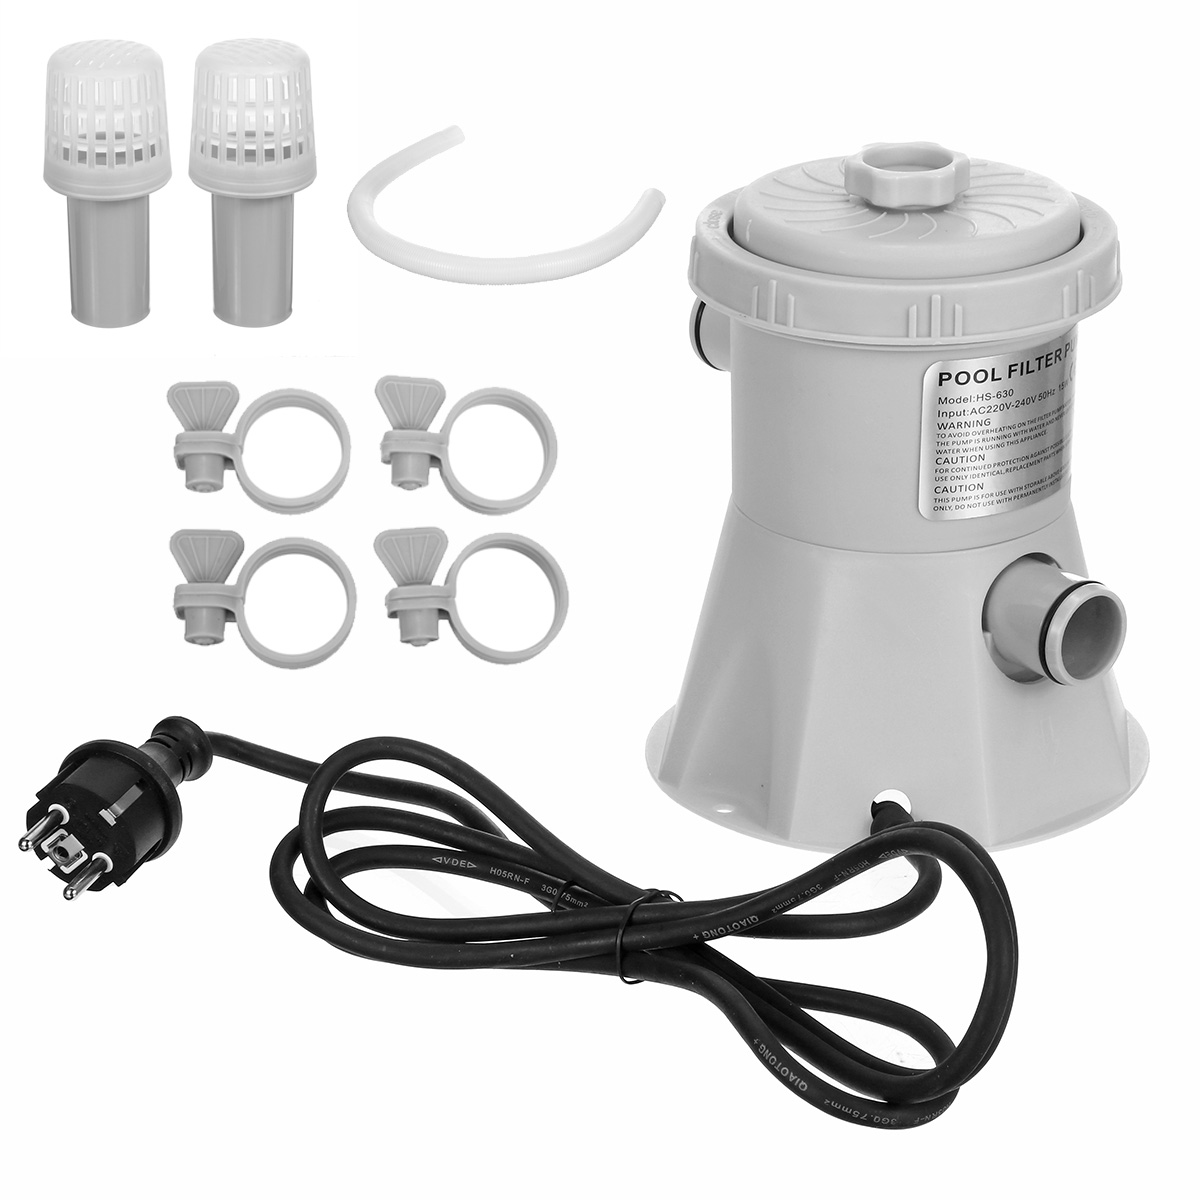 300GAL-Electric-Swimming-Pool-Filter-Pump-For-Above-Ground-Pools-Cleaning-Tools-1698374-10